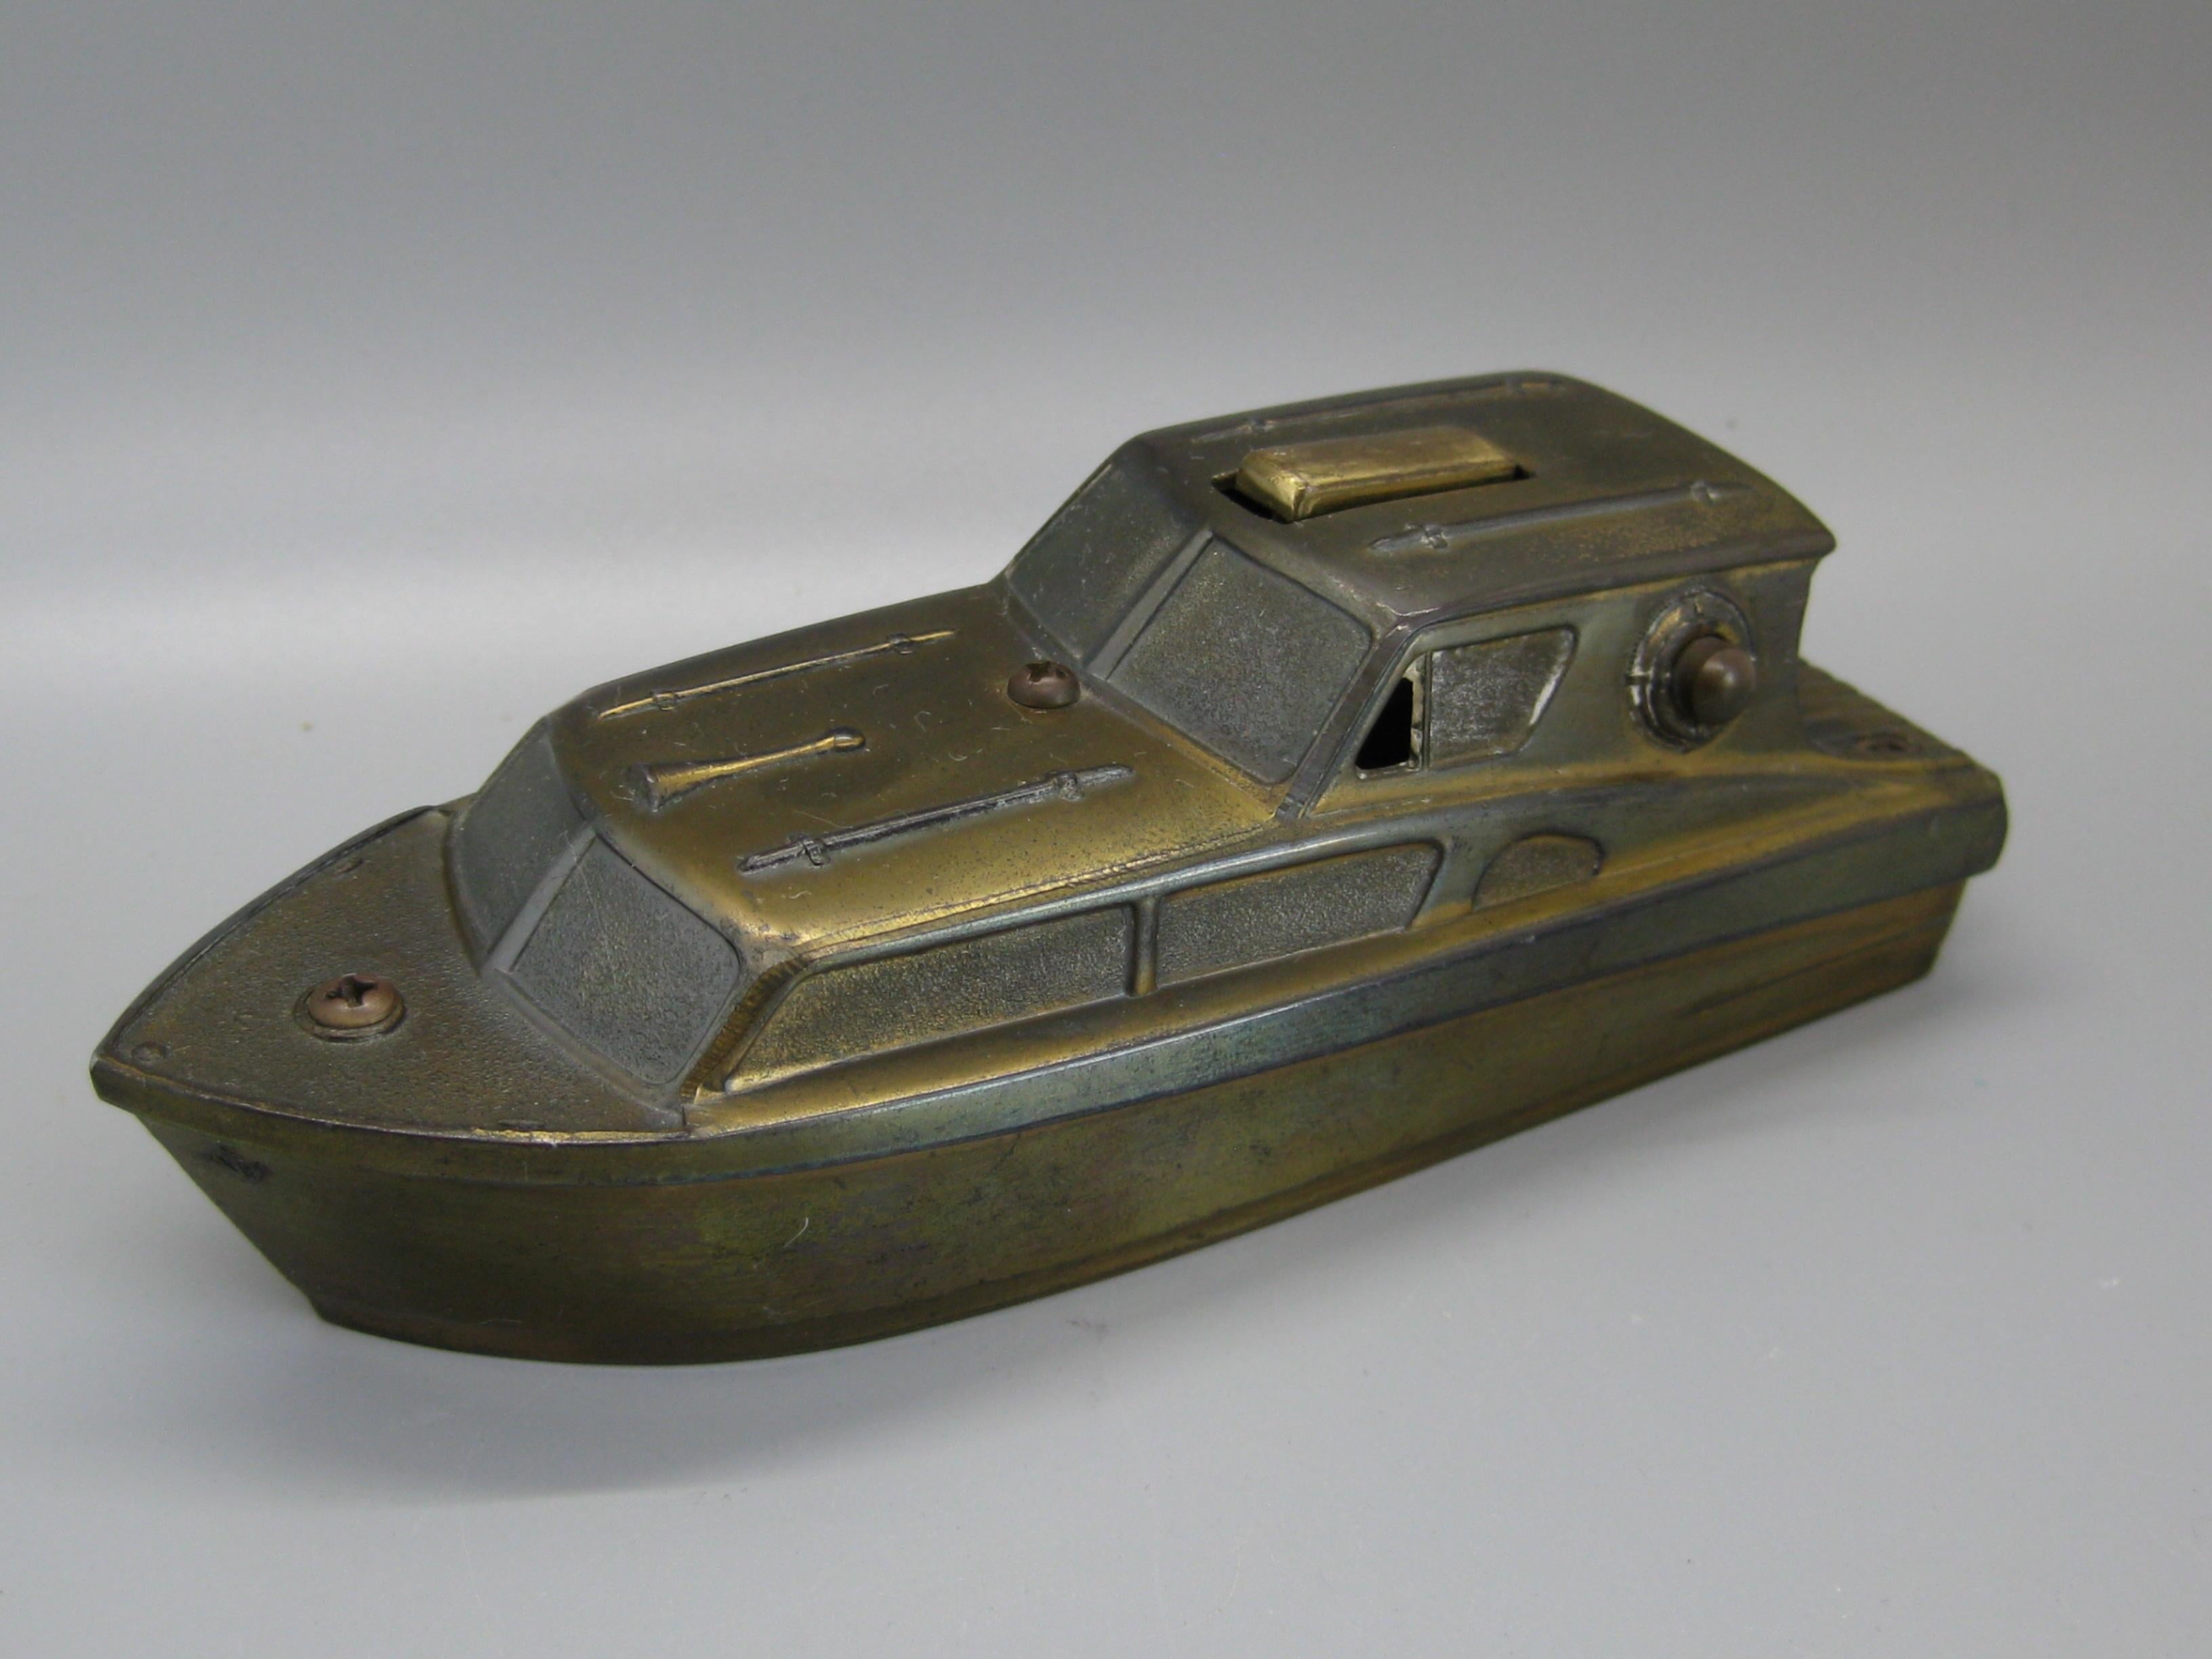 Vintage yacht or boat nautical figural table lighter dating from the 1950s. Has a push button on the side that lights the lighter. Works as it should. In the shape of a yacht or boat and is a must for any sailor or yacht owner. Made of metal and has